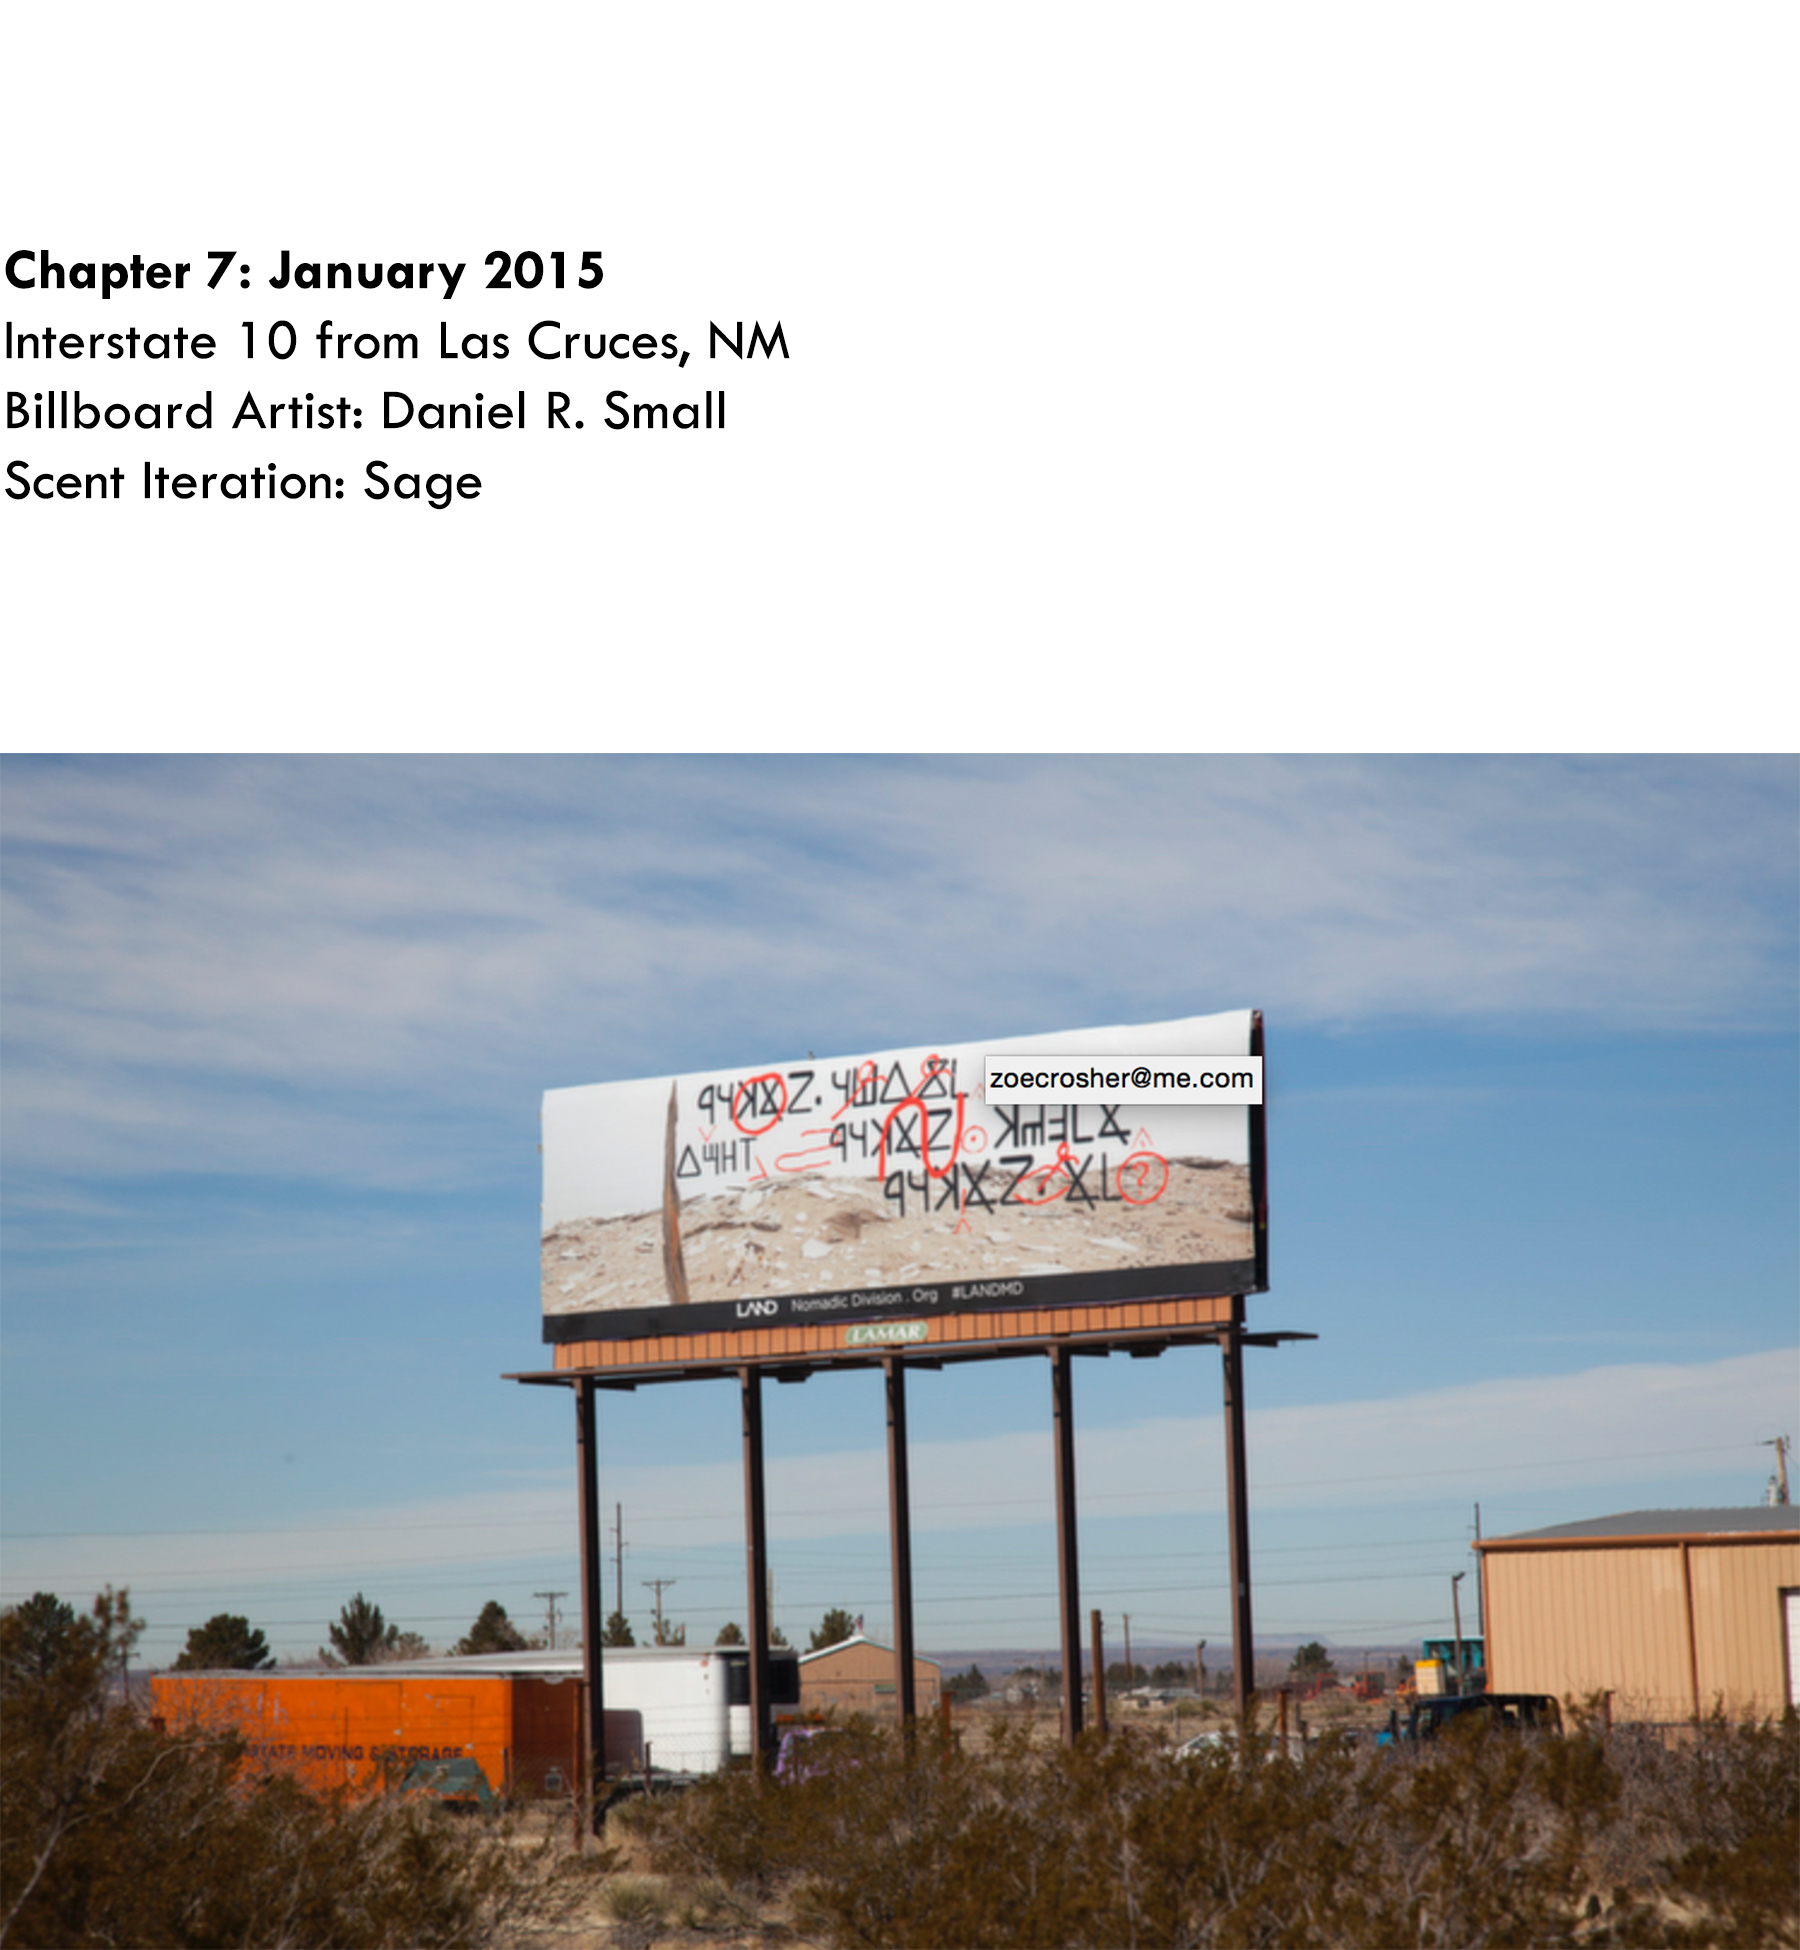 Chapter 7: January 2015, Daniel Small, Interstate 10 from Las Cruces, NM, Scent Iteration: Sage